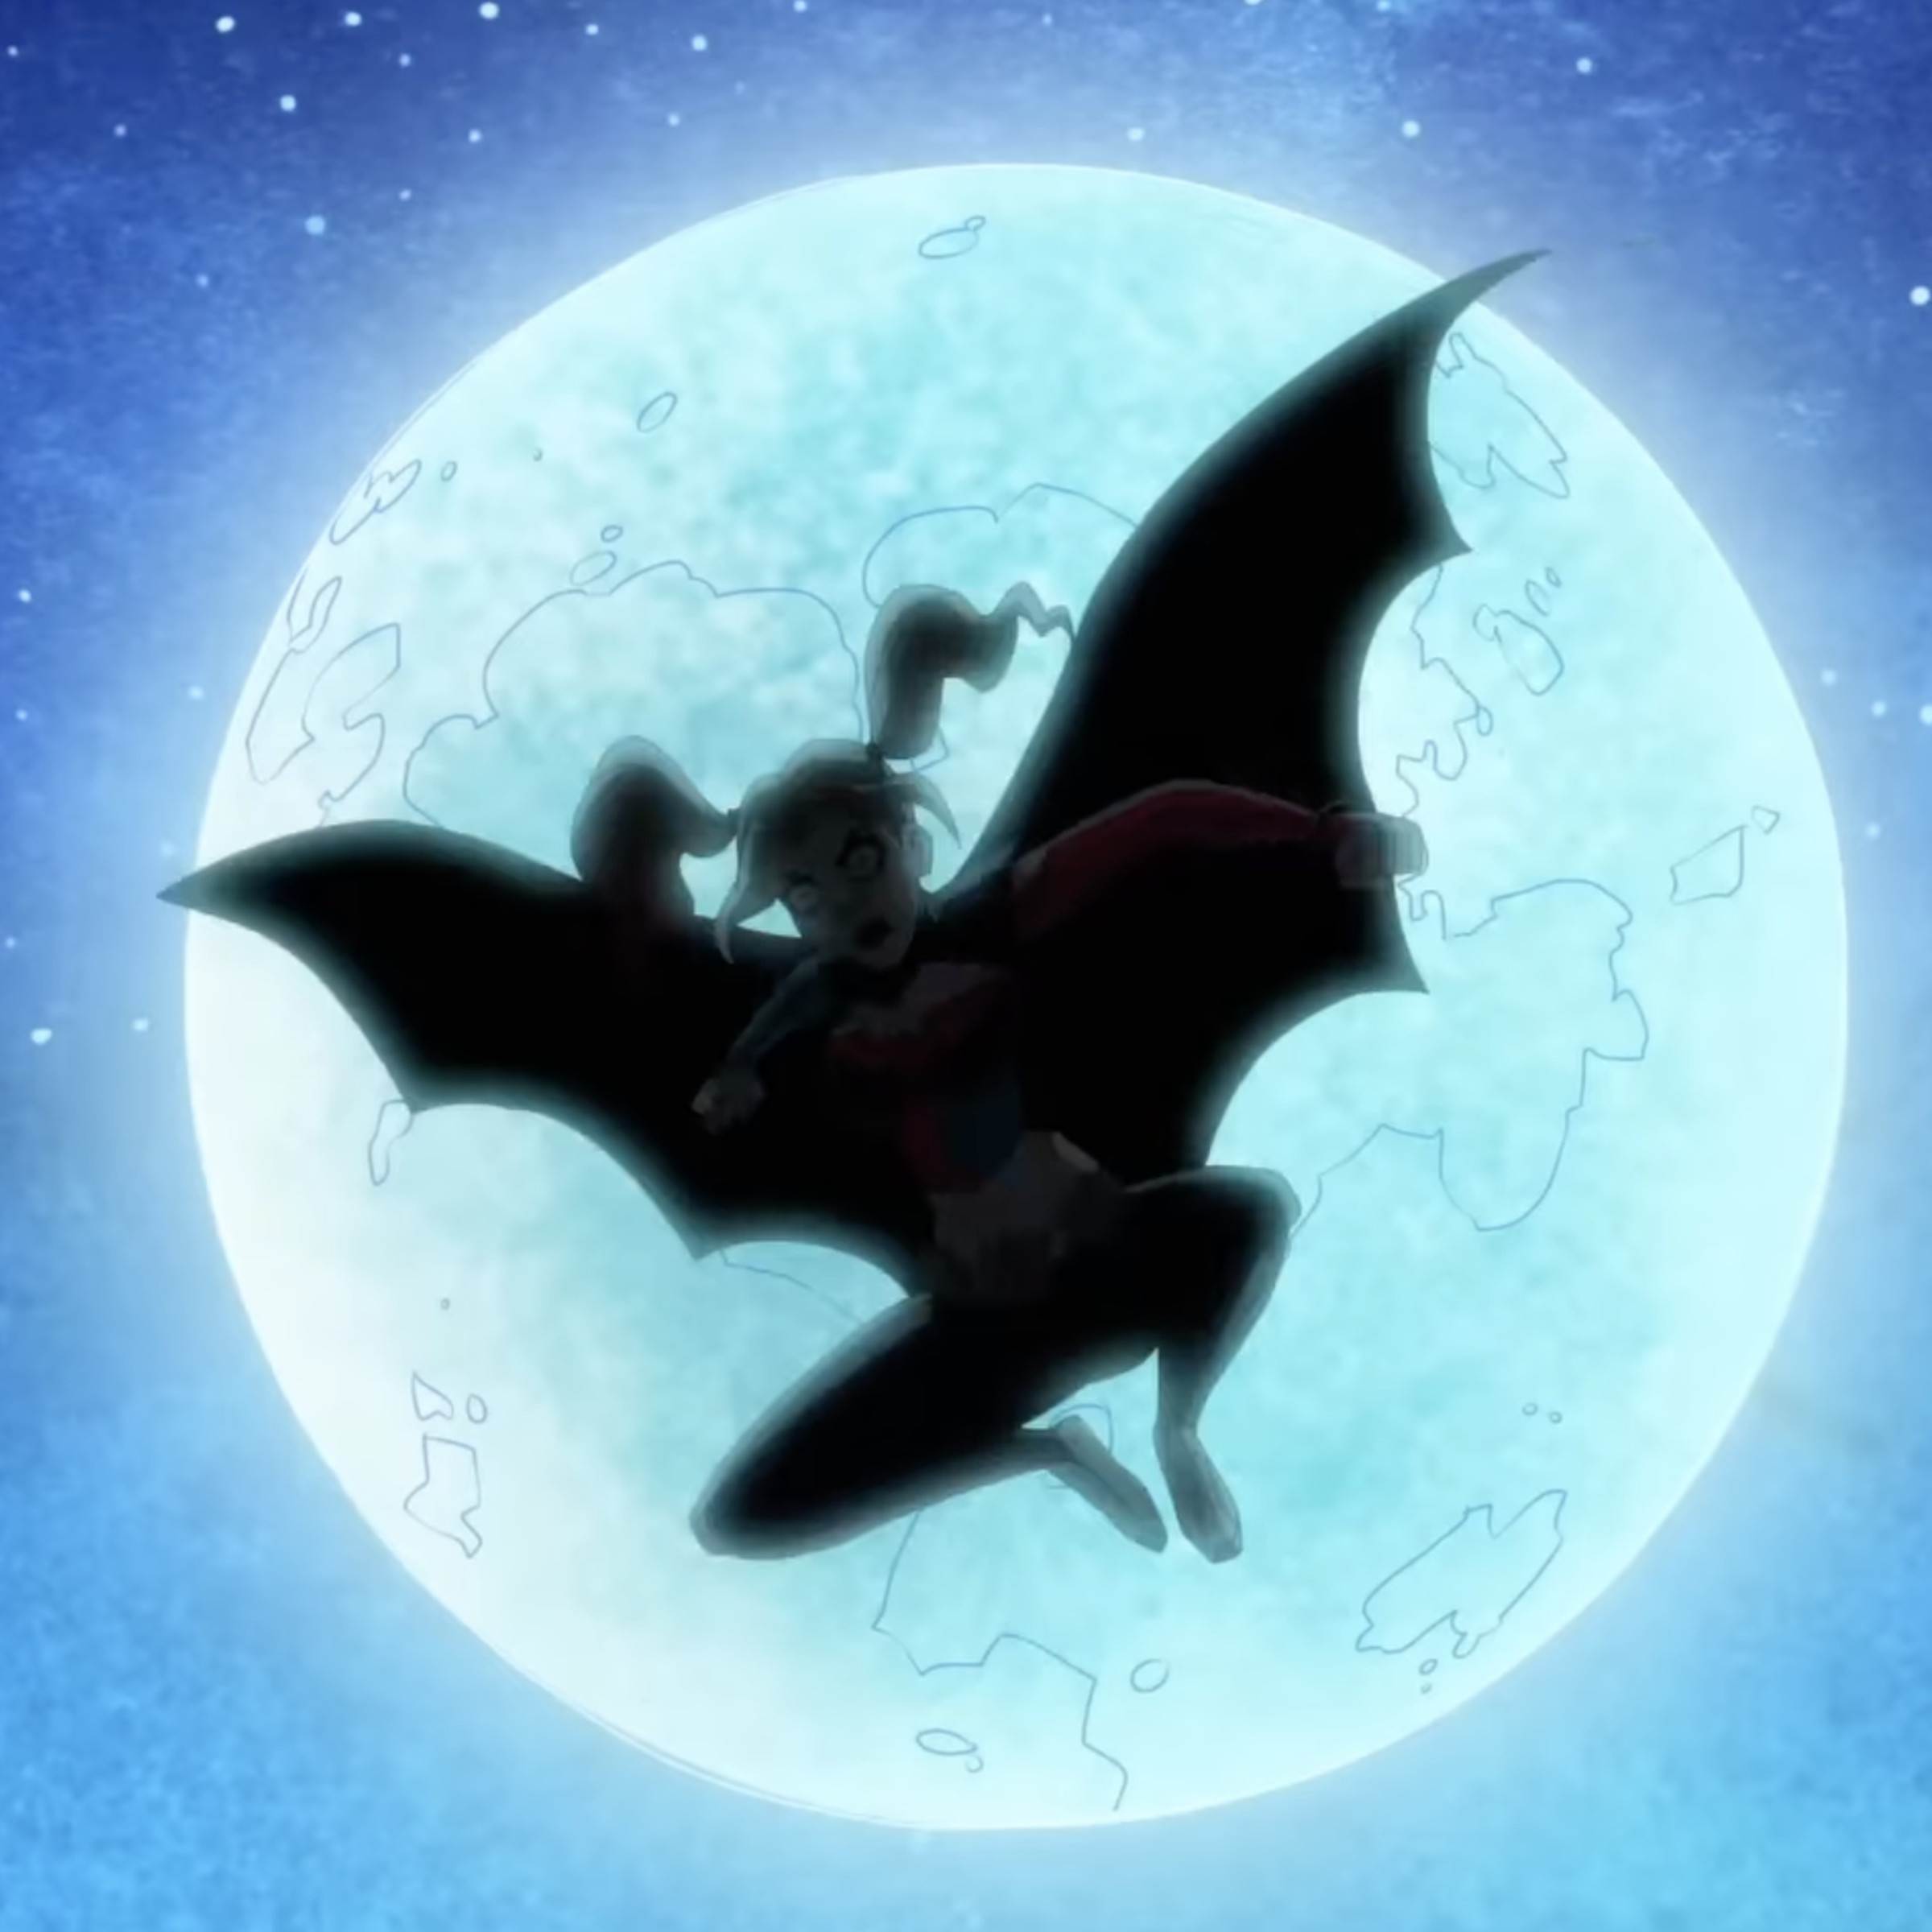 A silhouette of a woman in pigtails wearing a bat-cape and leaping across the night sky with a full moon shining behind her.